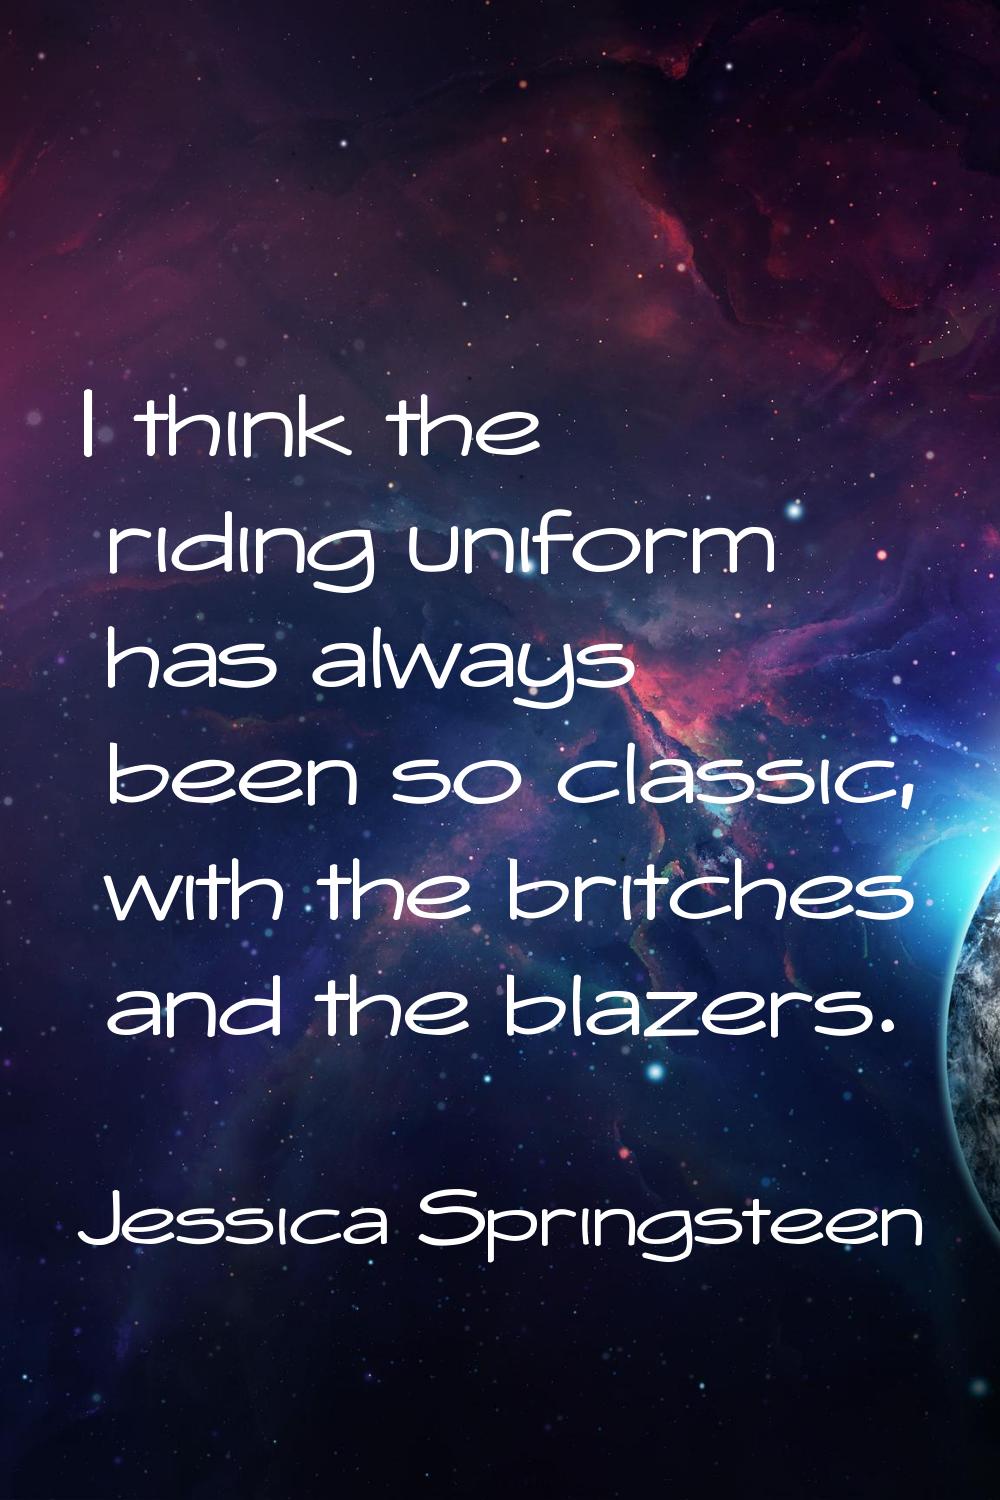 I think the riding uniform has always been so classic, with the britches and the blazers.